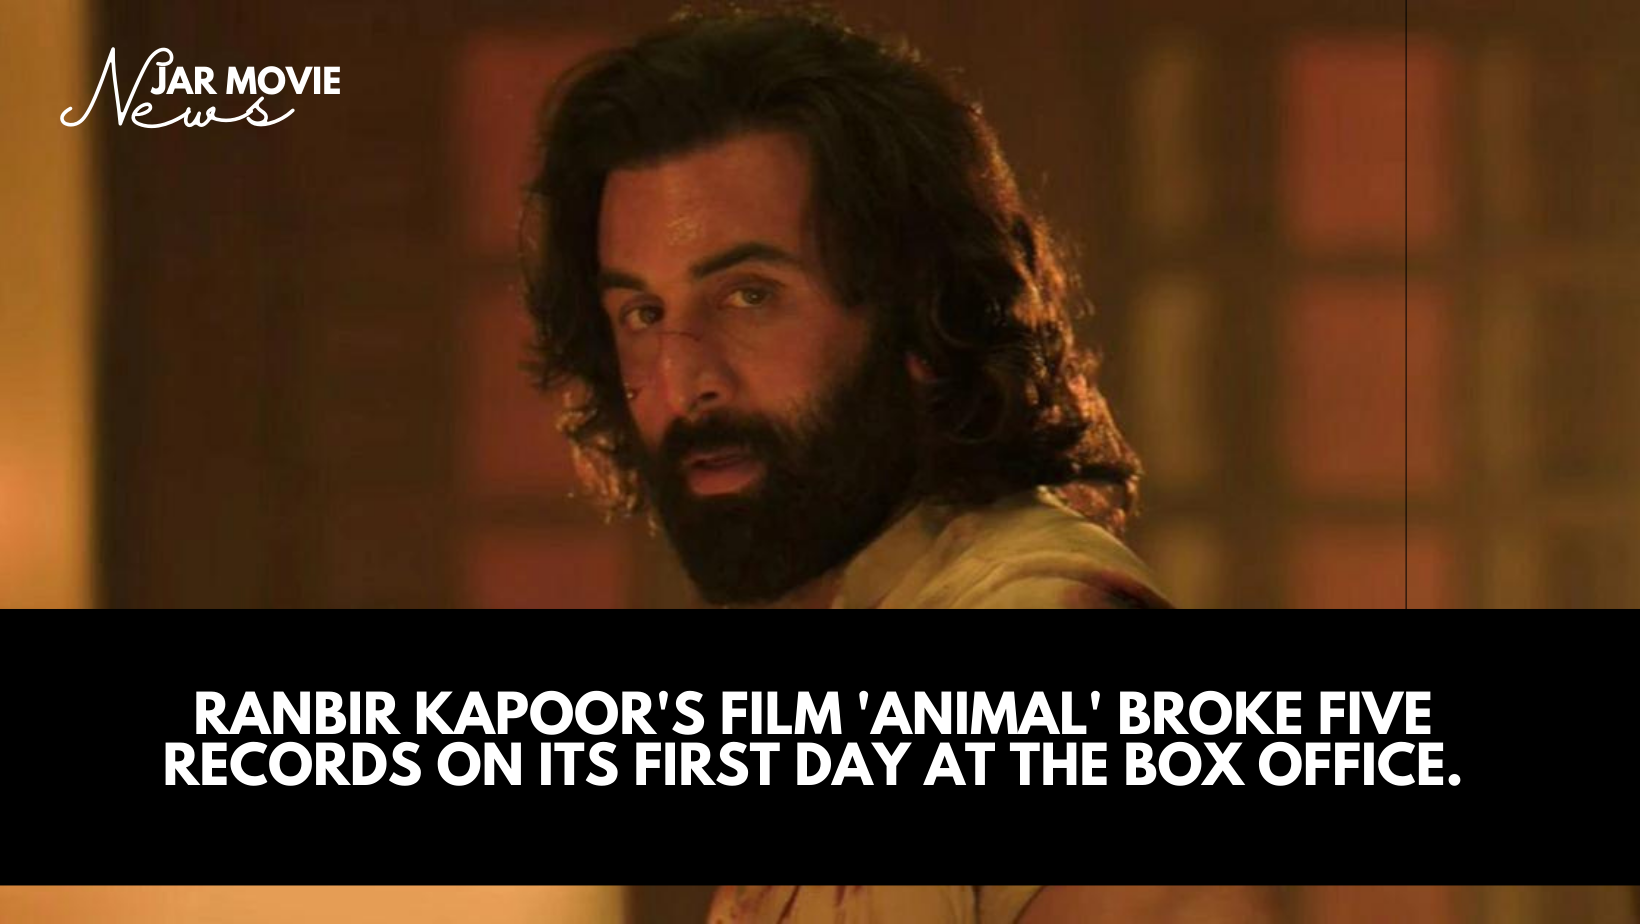 Ranbir Kapoor's film 'Animal' broke five records on its first day at the box office.